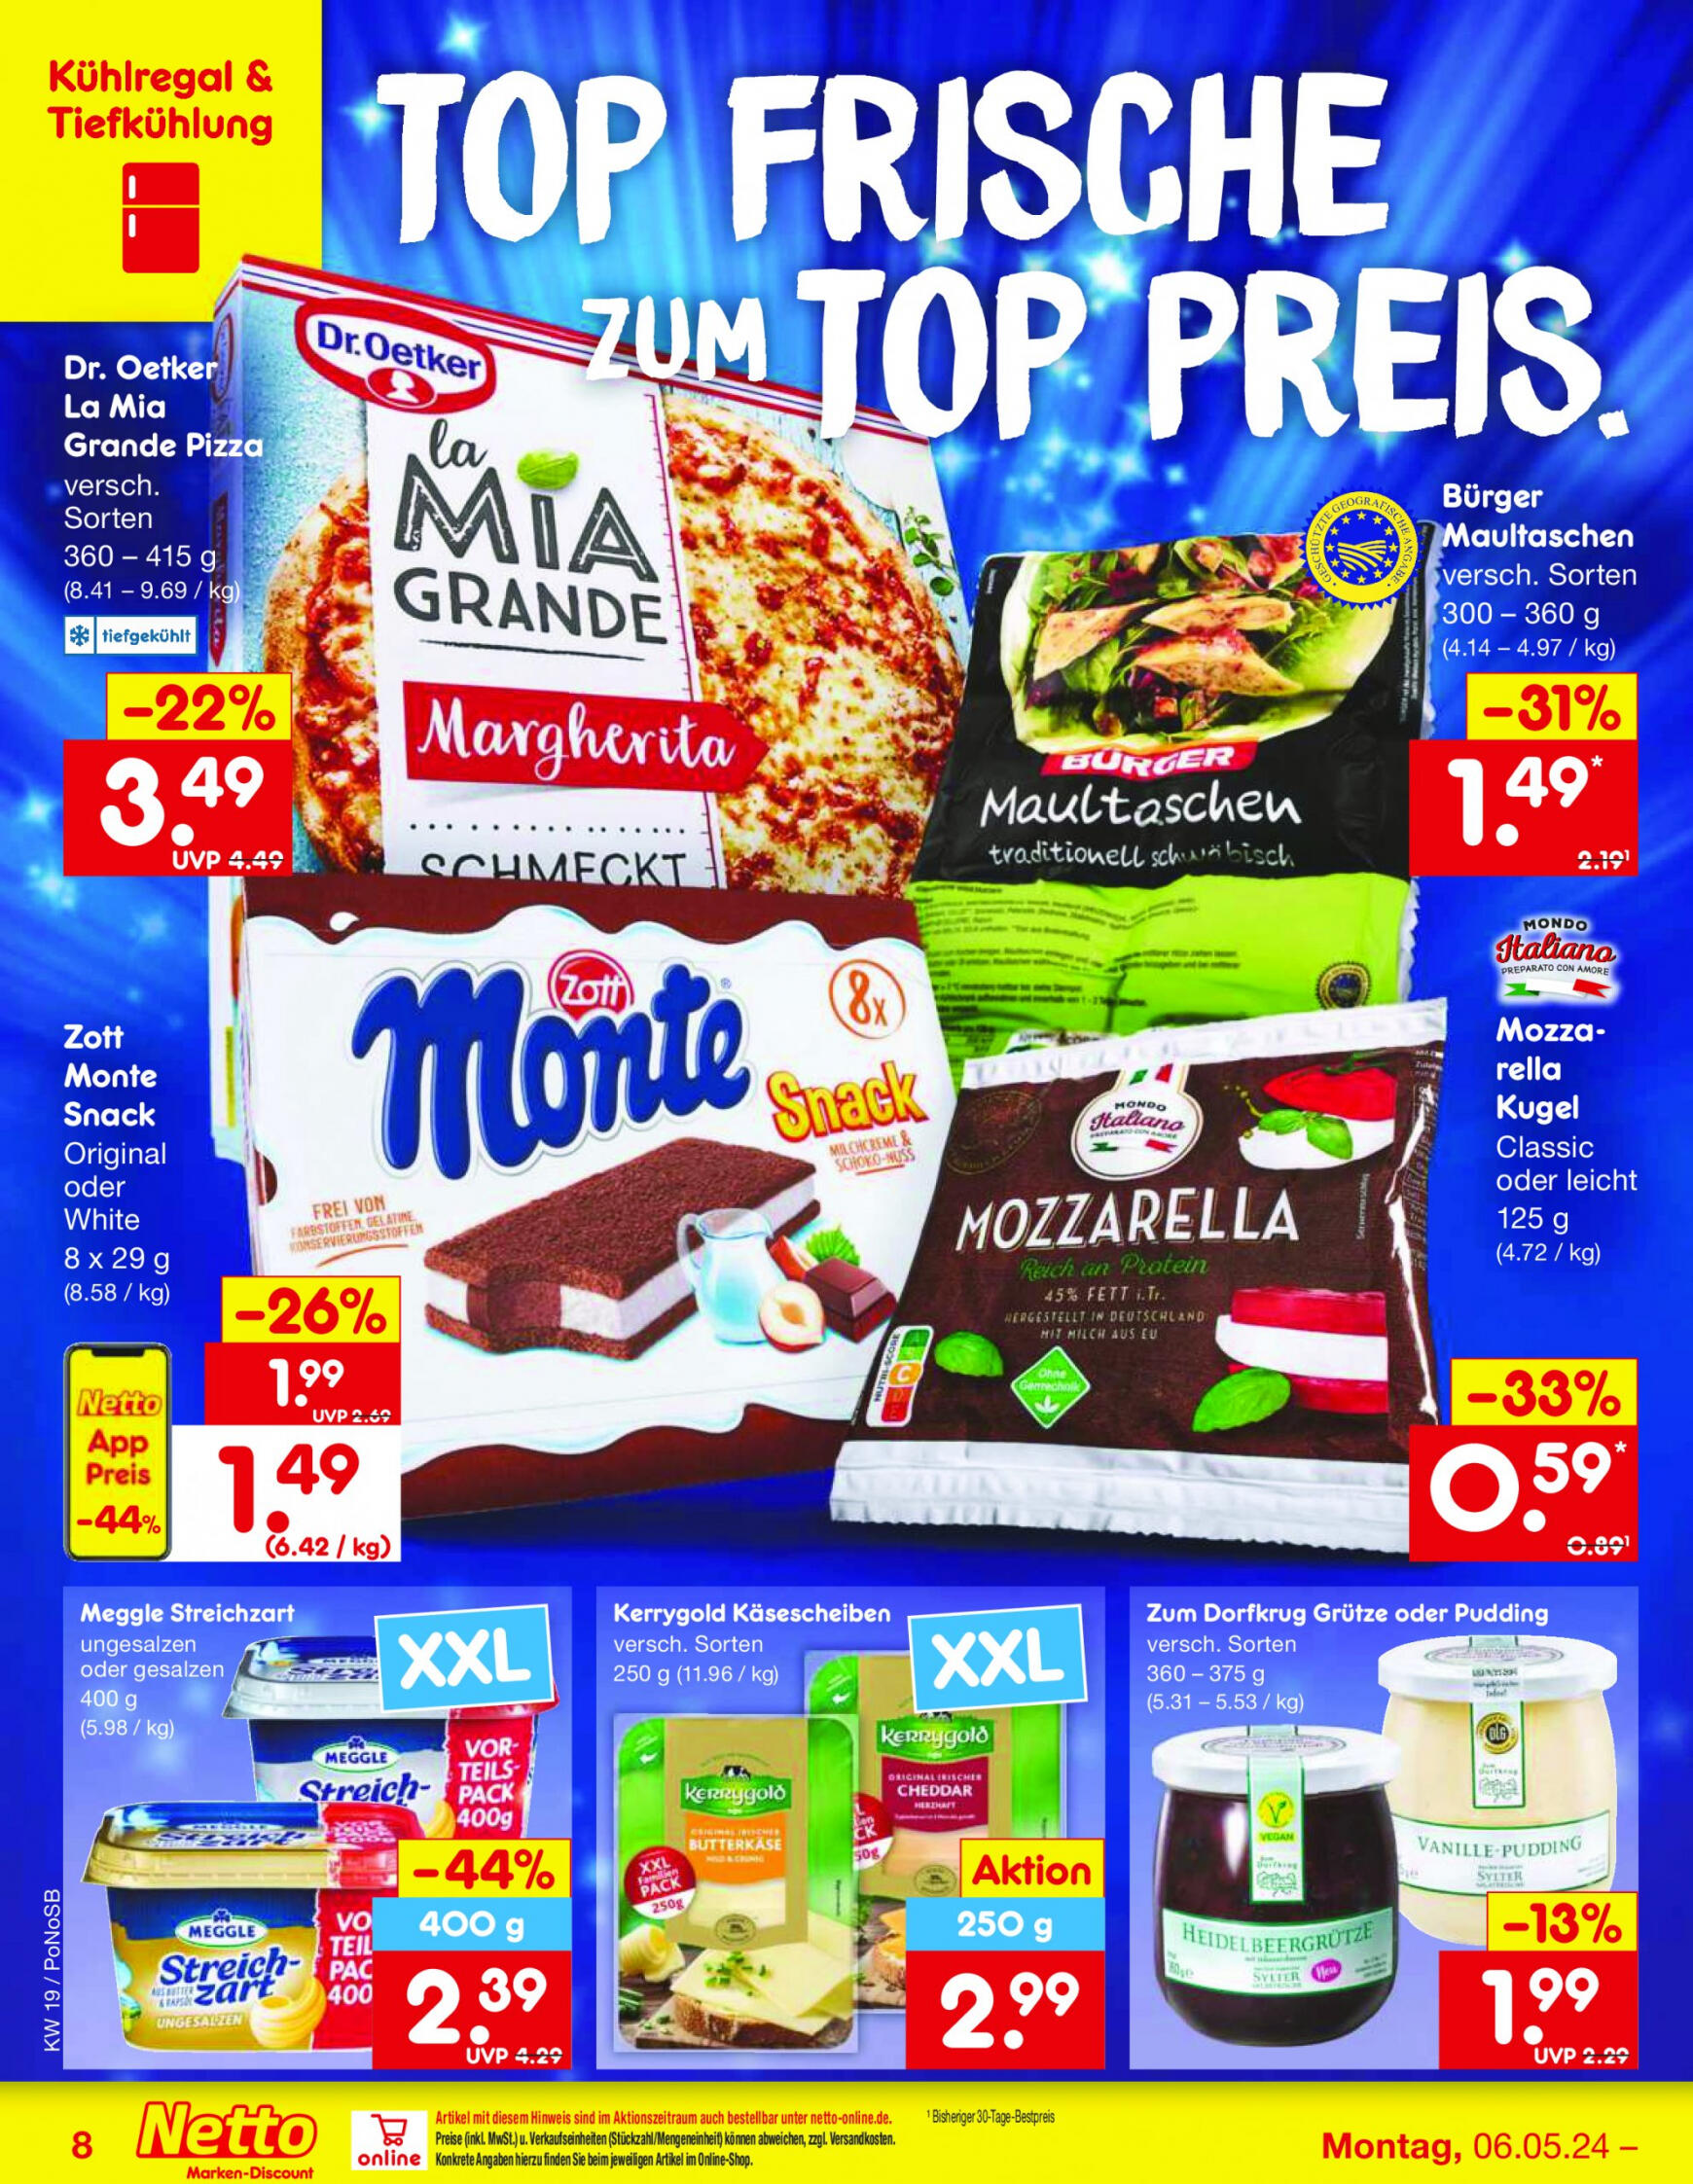 netto - Flyer Netto aktuell 06.05. - 11.05. - page: 8